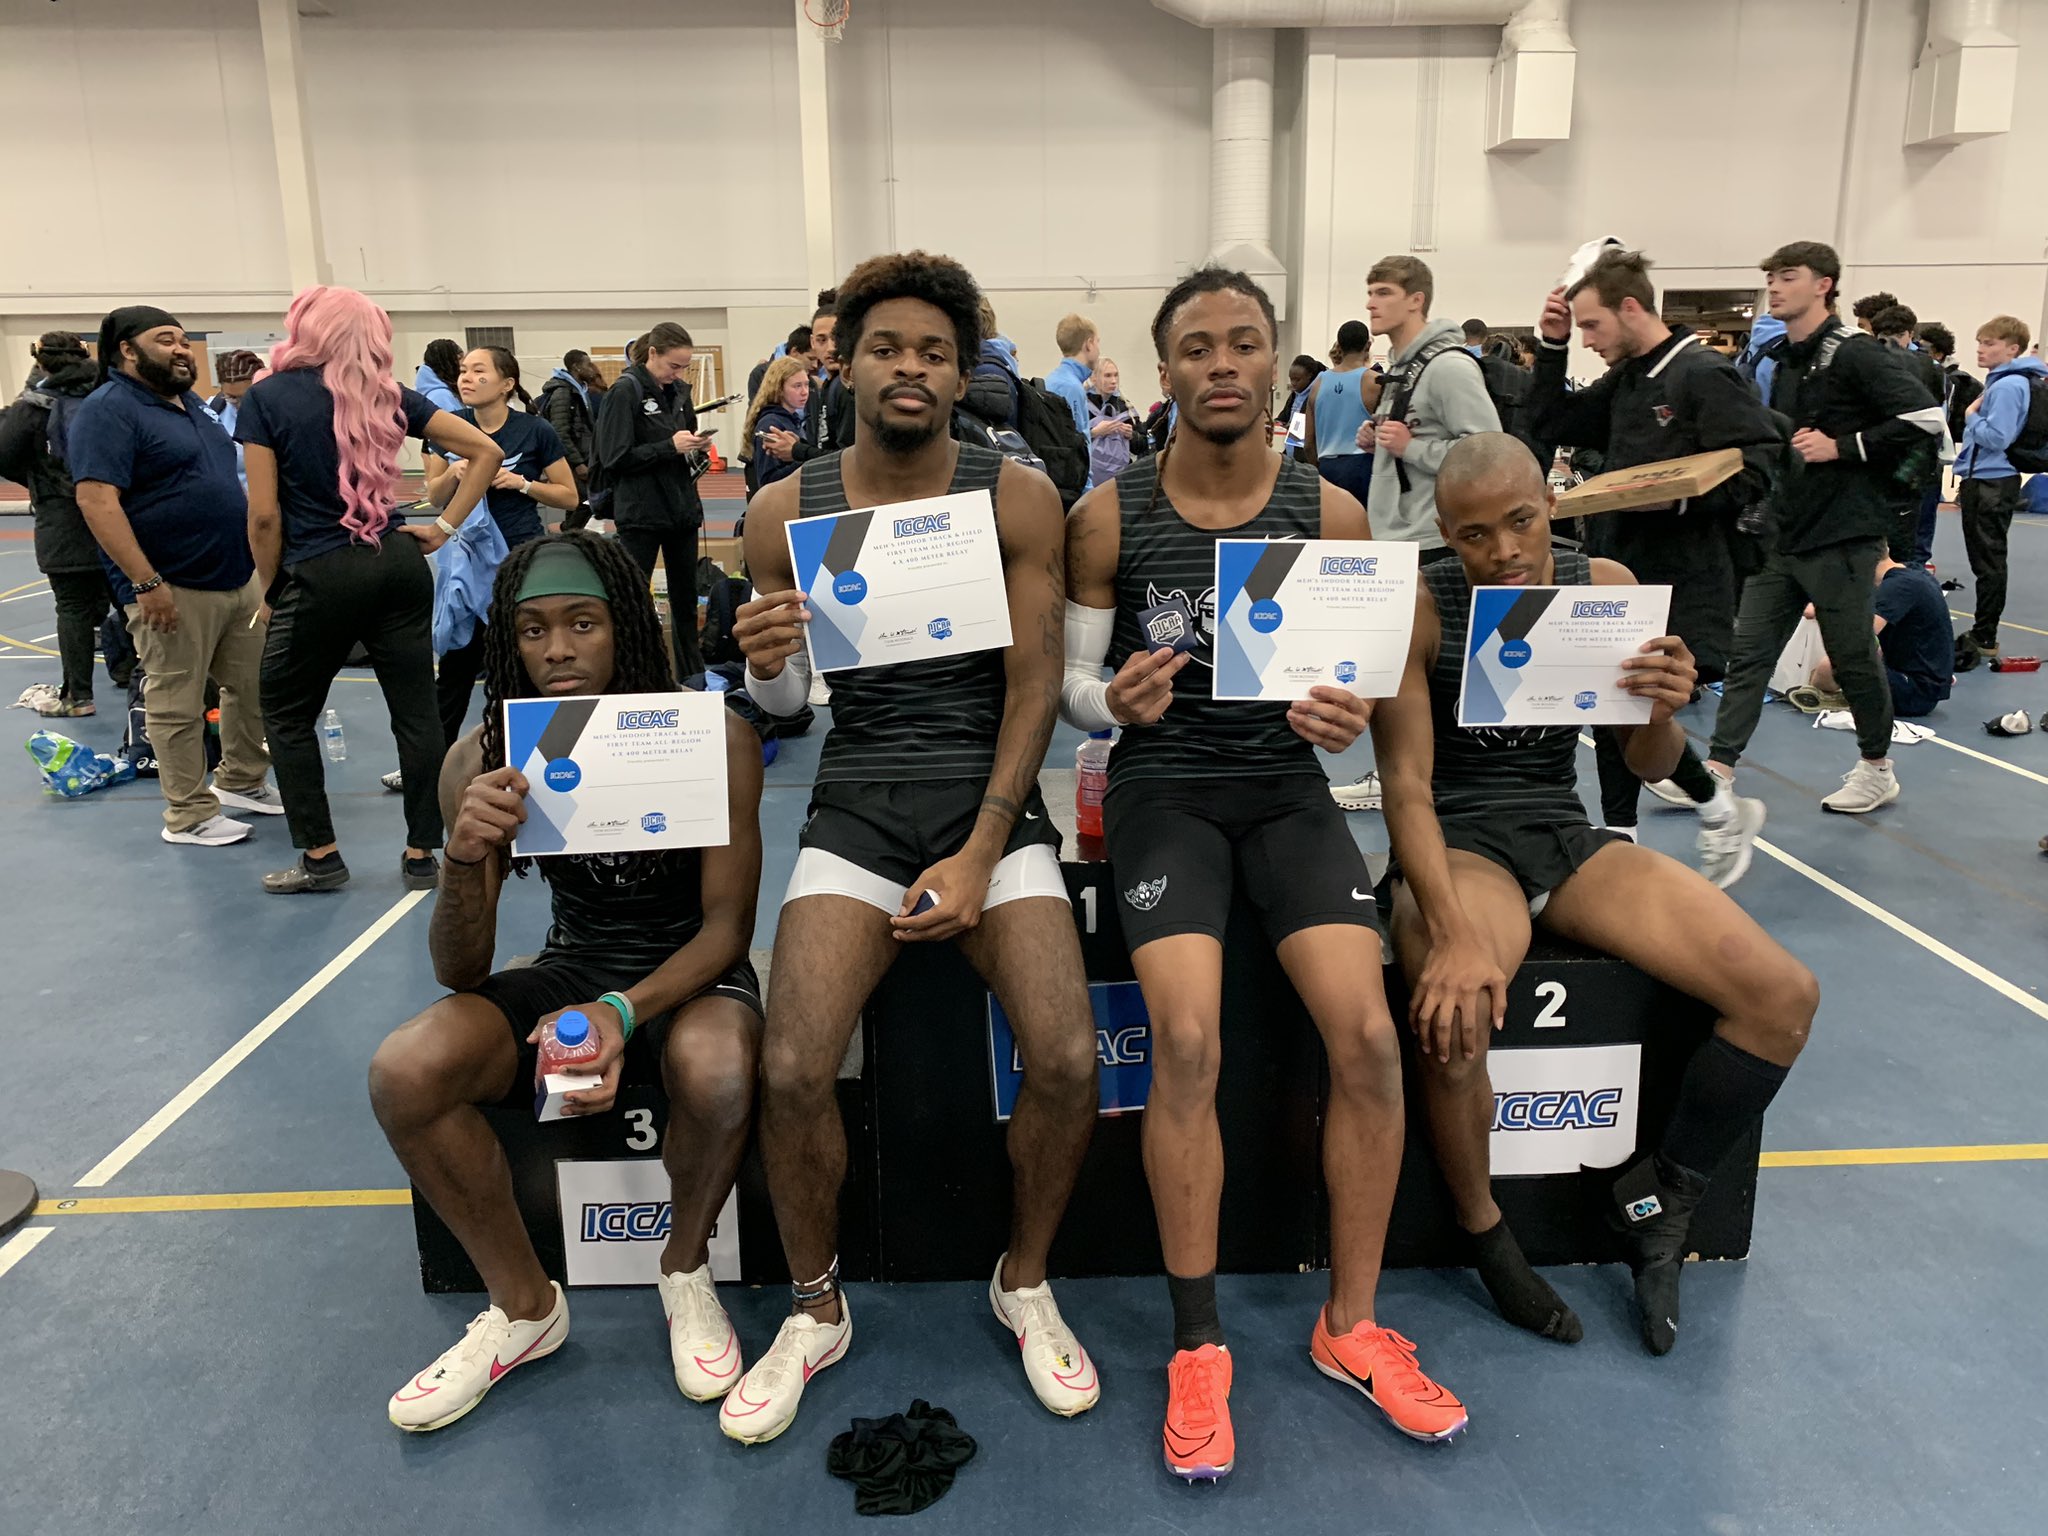 WARRIORS WIN SEVEN TITLES, PLACE 2ND AT REGIONALS